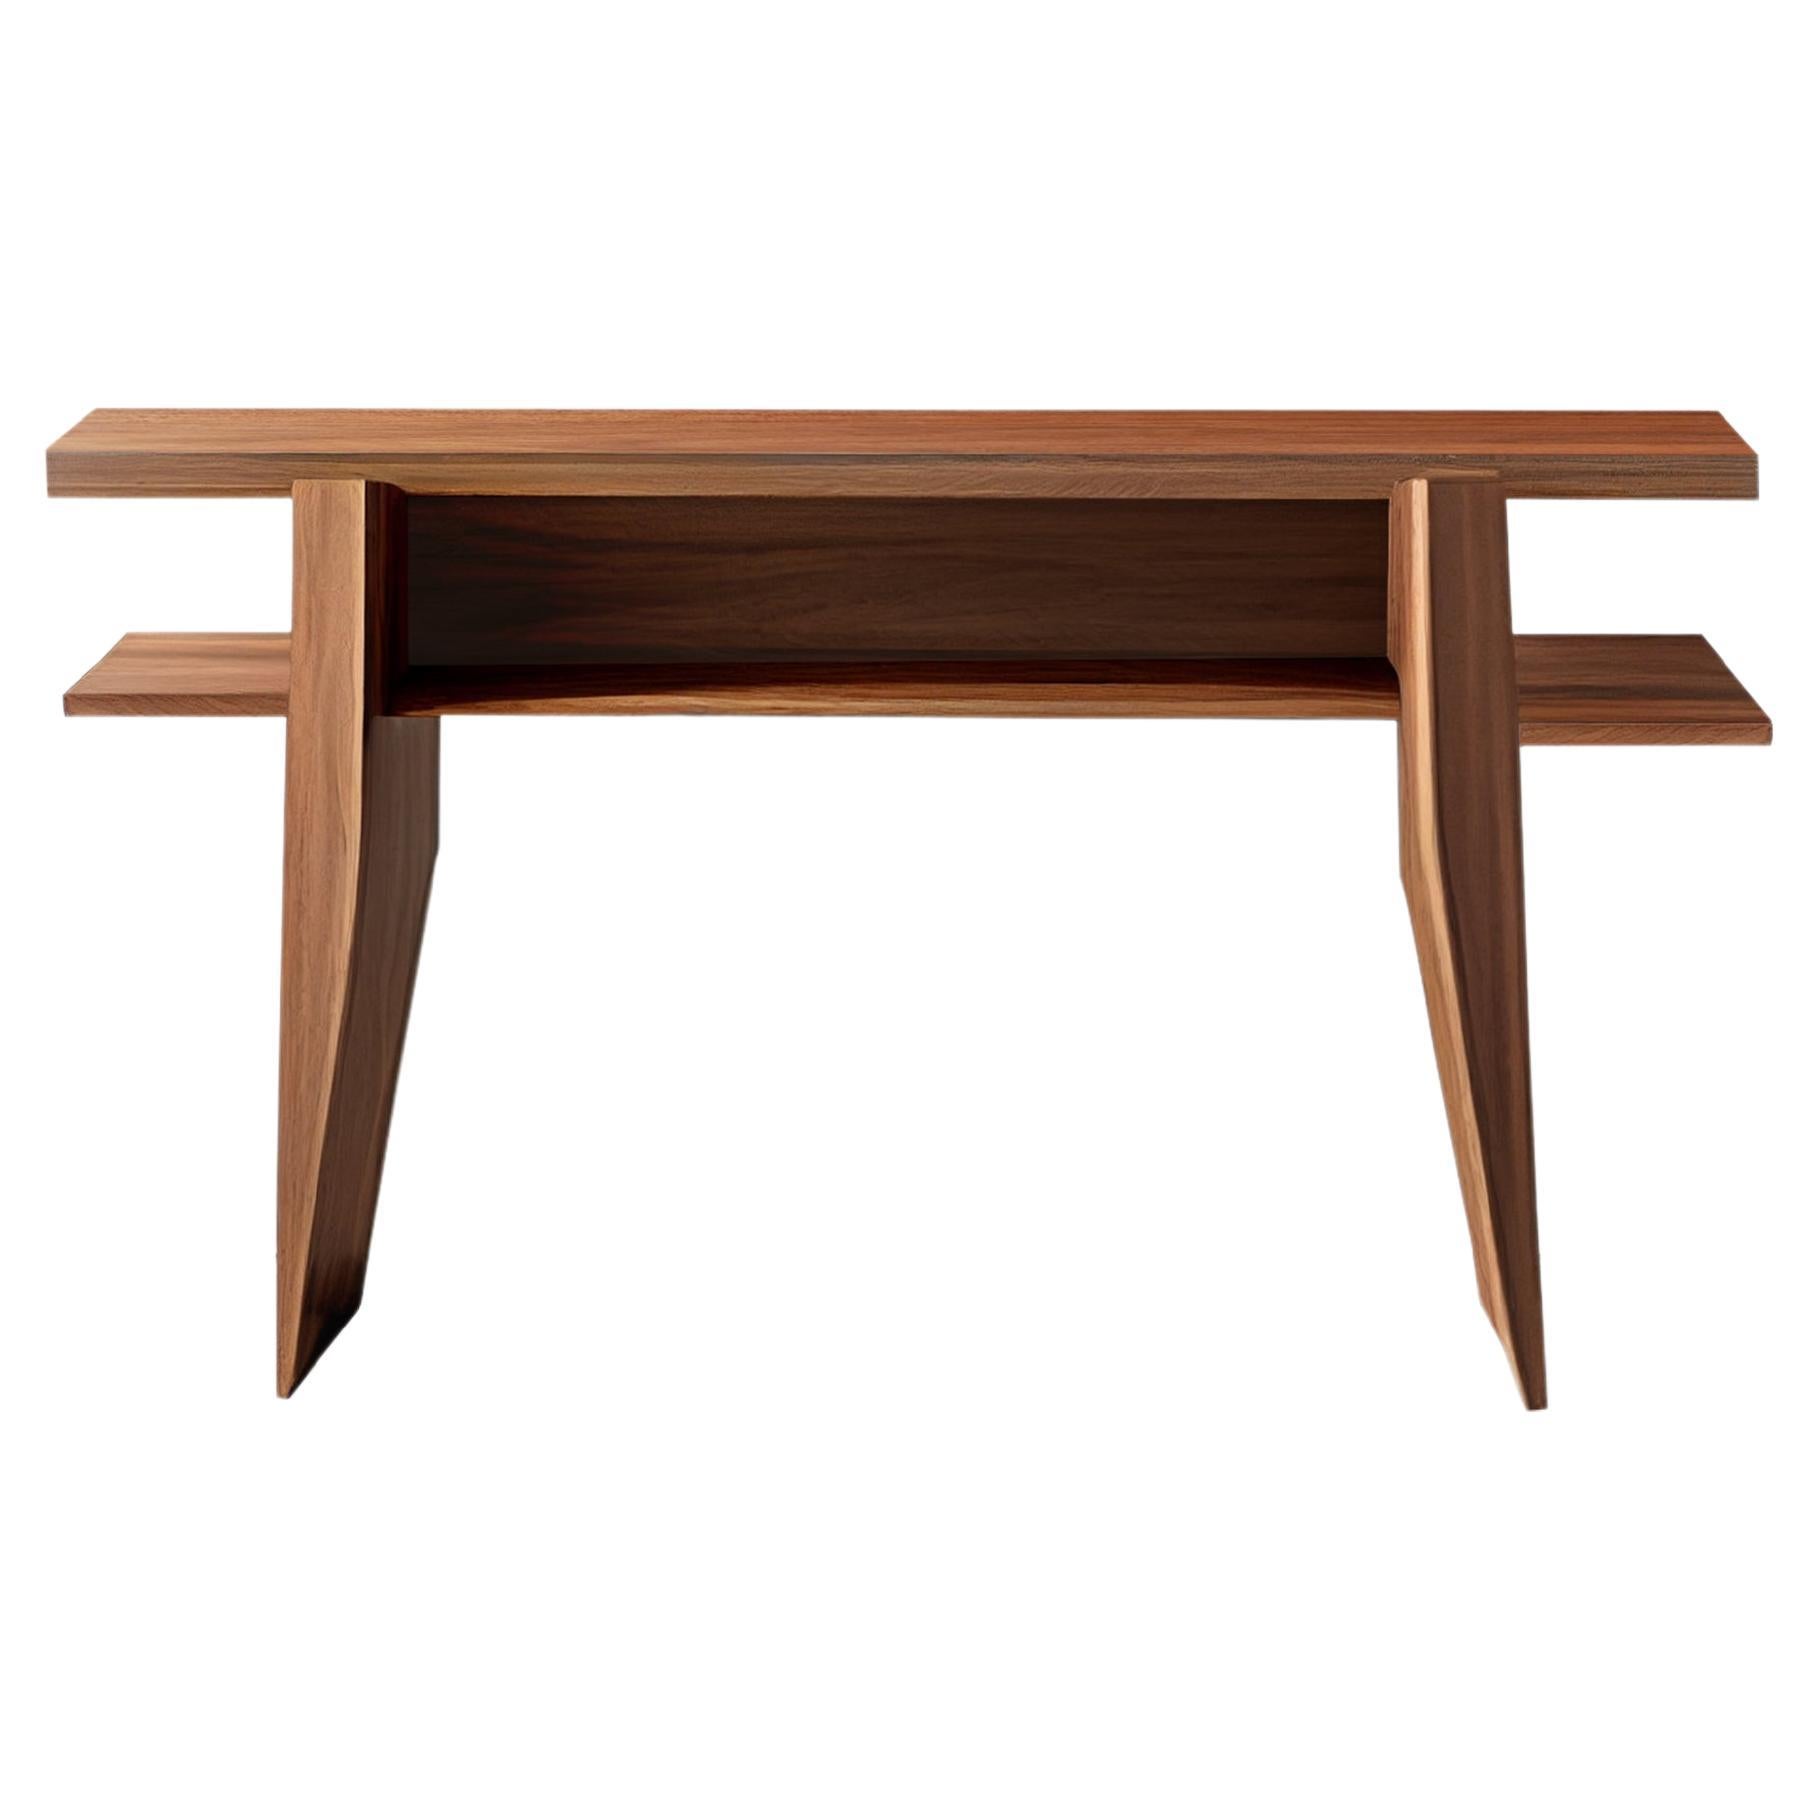 Decorative Console Table, Sideboard Made of Solid Walnut Wood, Narrow Console For Sale